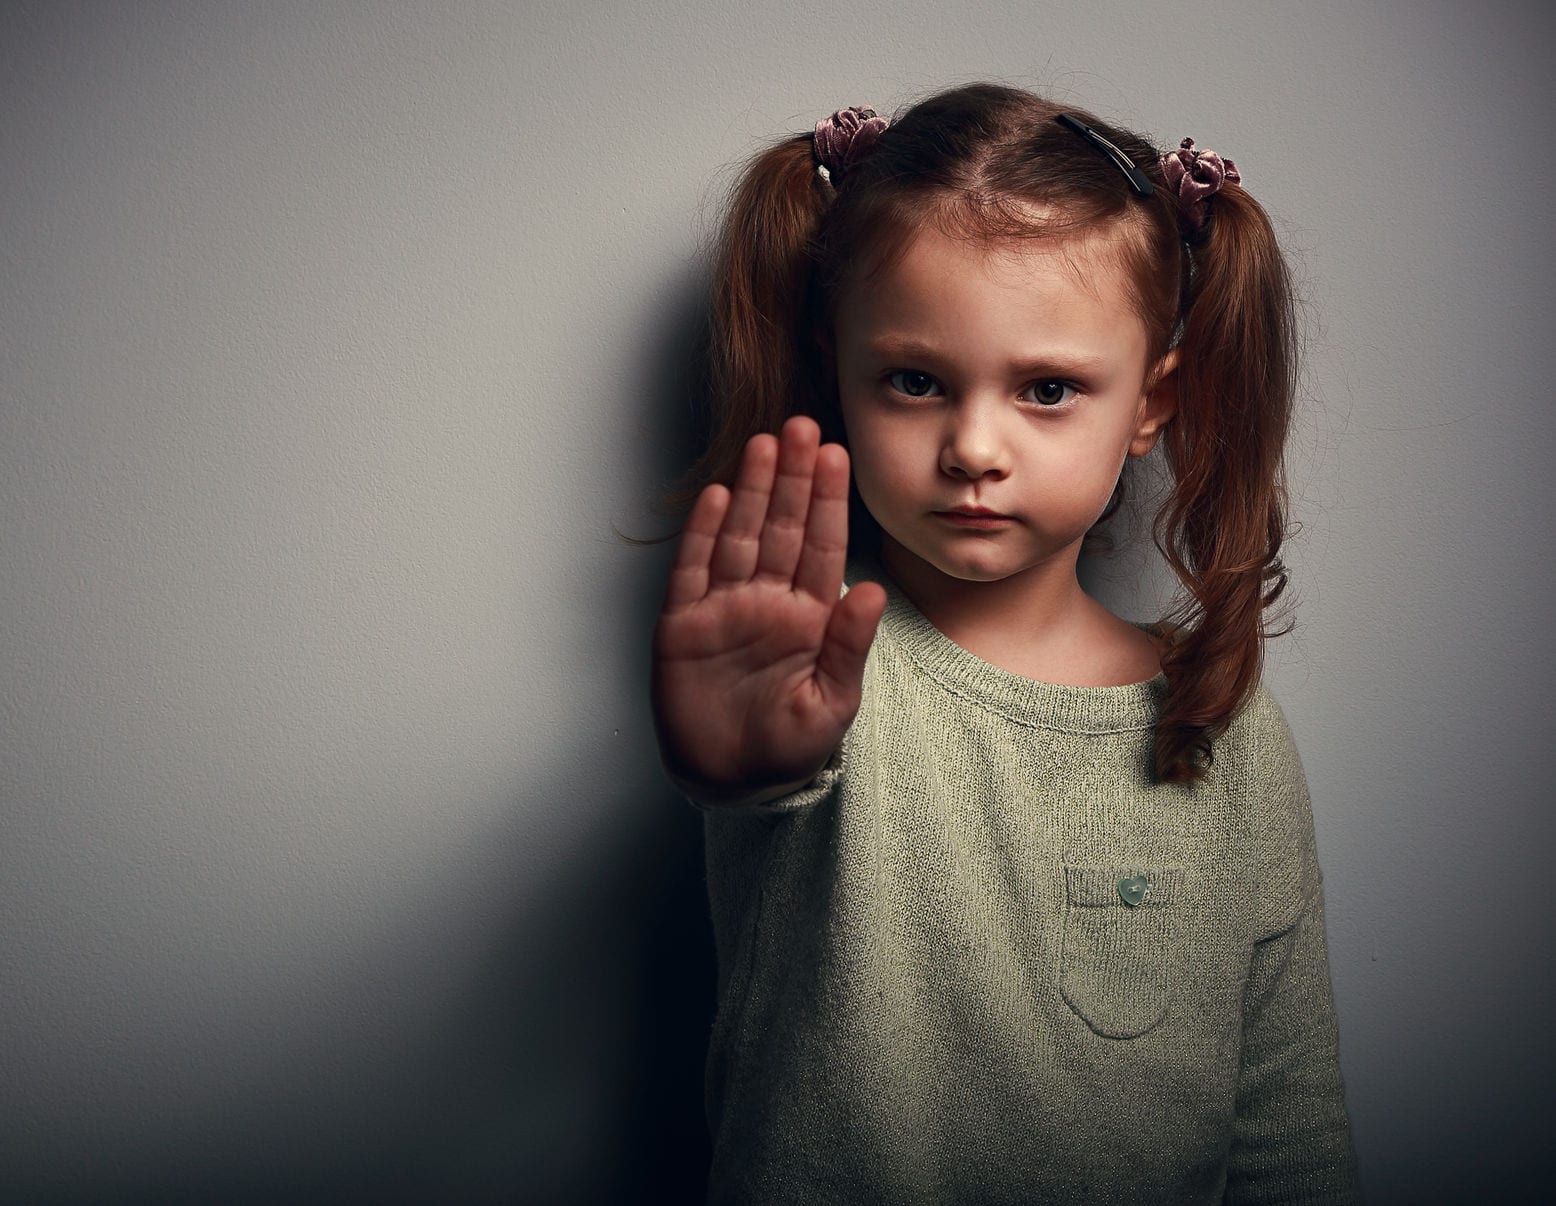 Child Abuse Epidemic? What's Really Happening in Minnesota